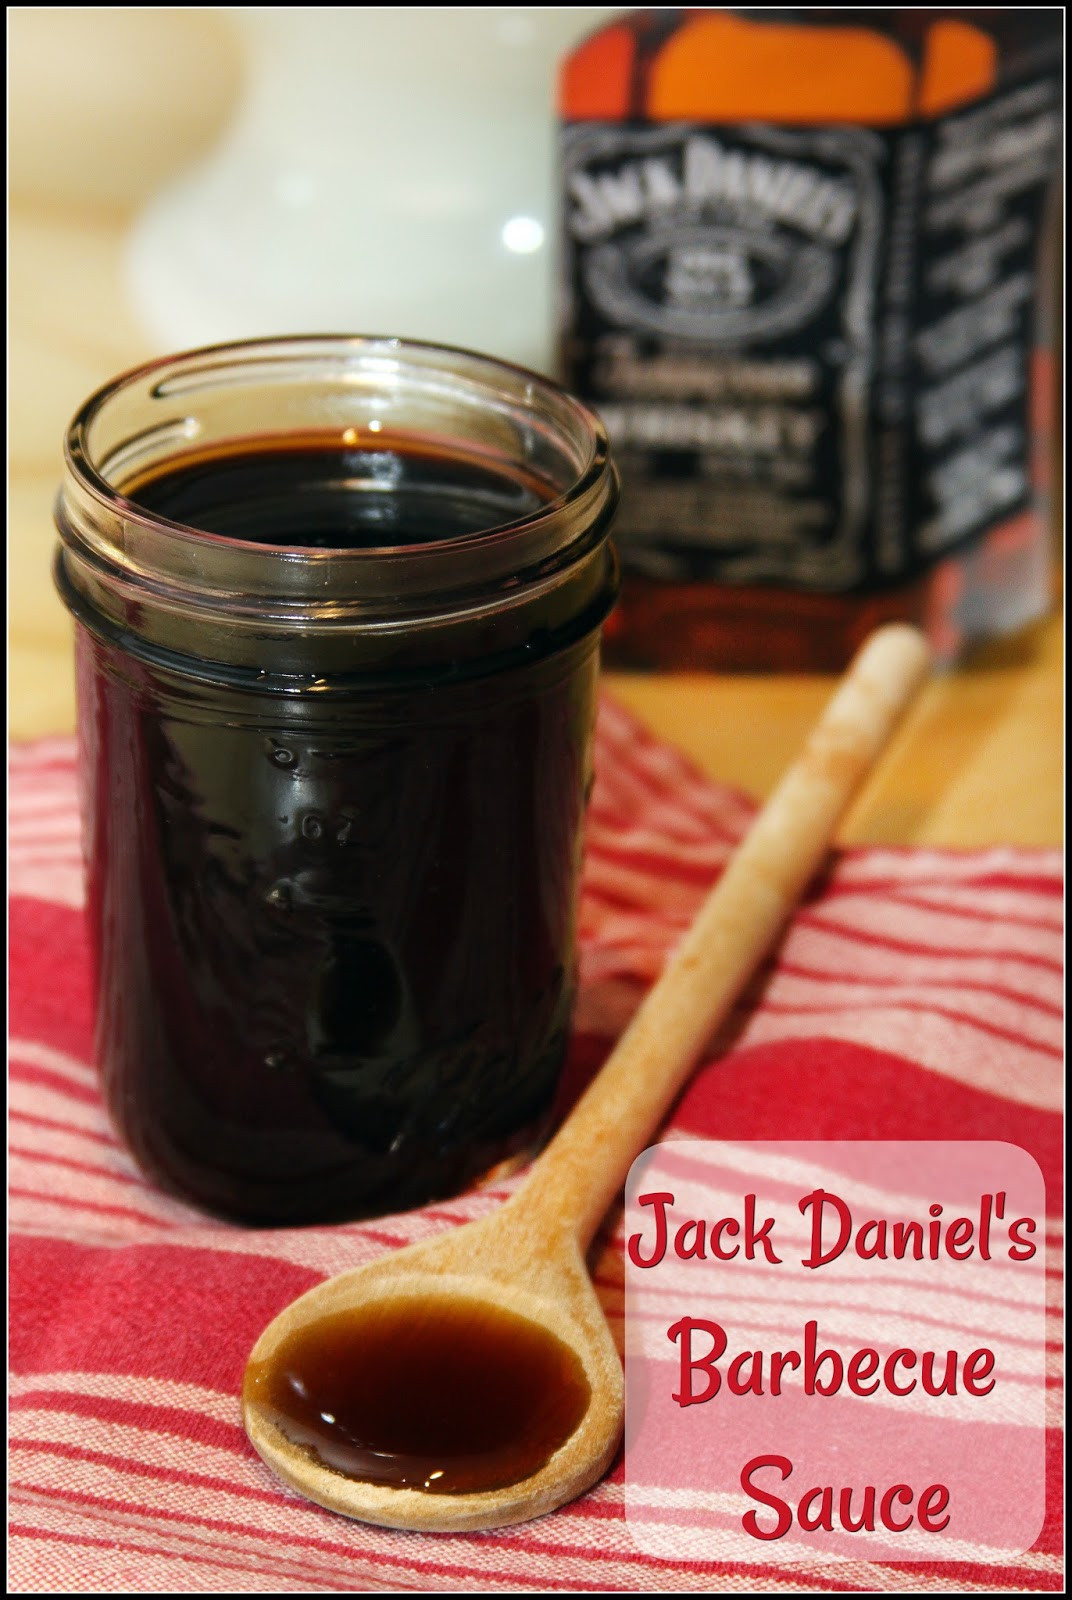 Jack Daniels Bbq Sauce Recipes
 For the Love of Food Ashton s Jack Daniel s Barbecue BBQ